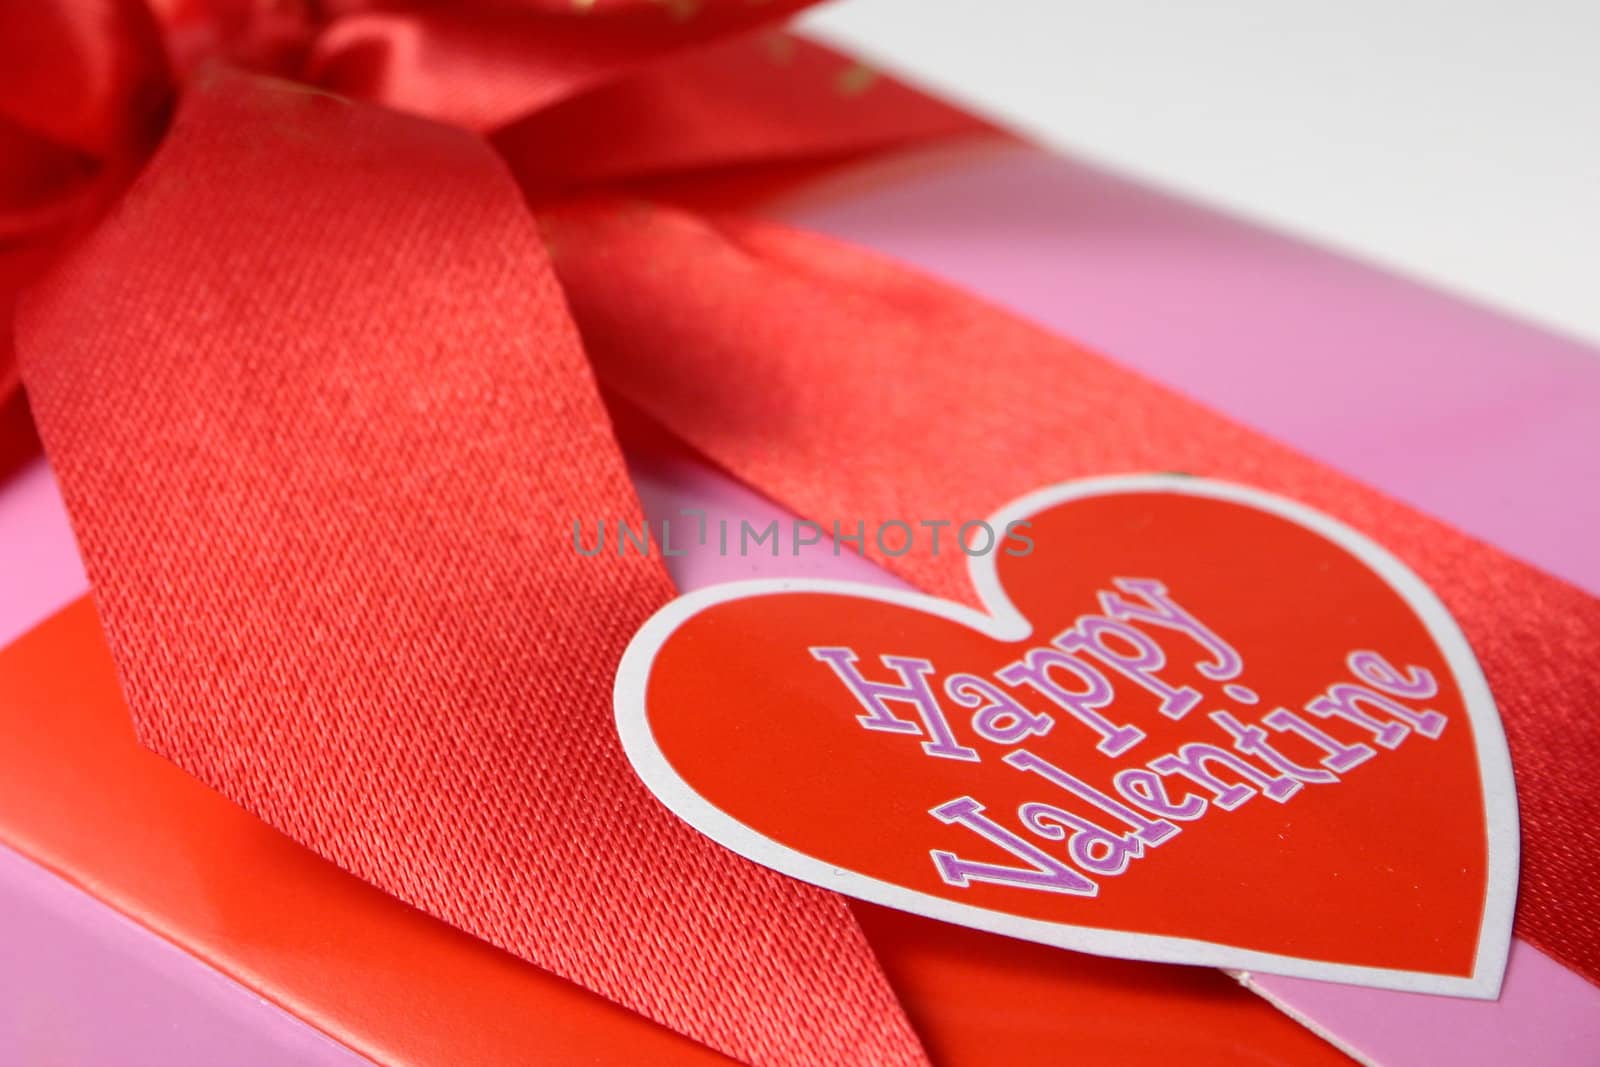 Red Valentine Heart on a pink wrapped gift